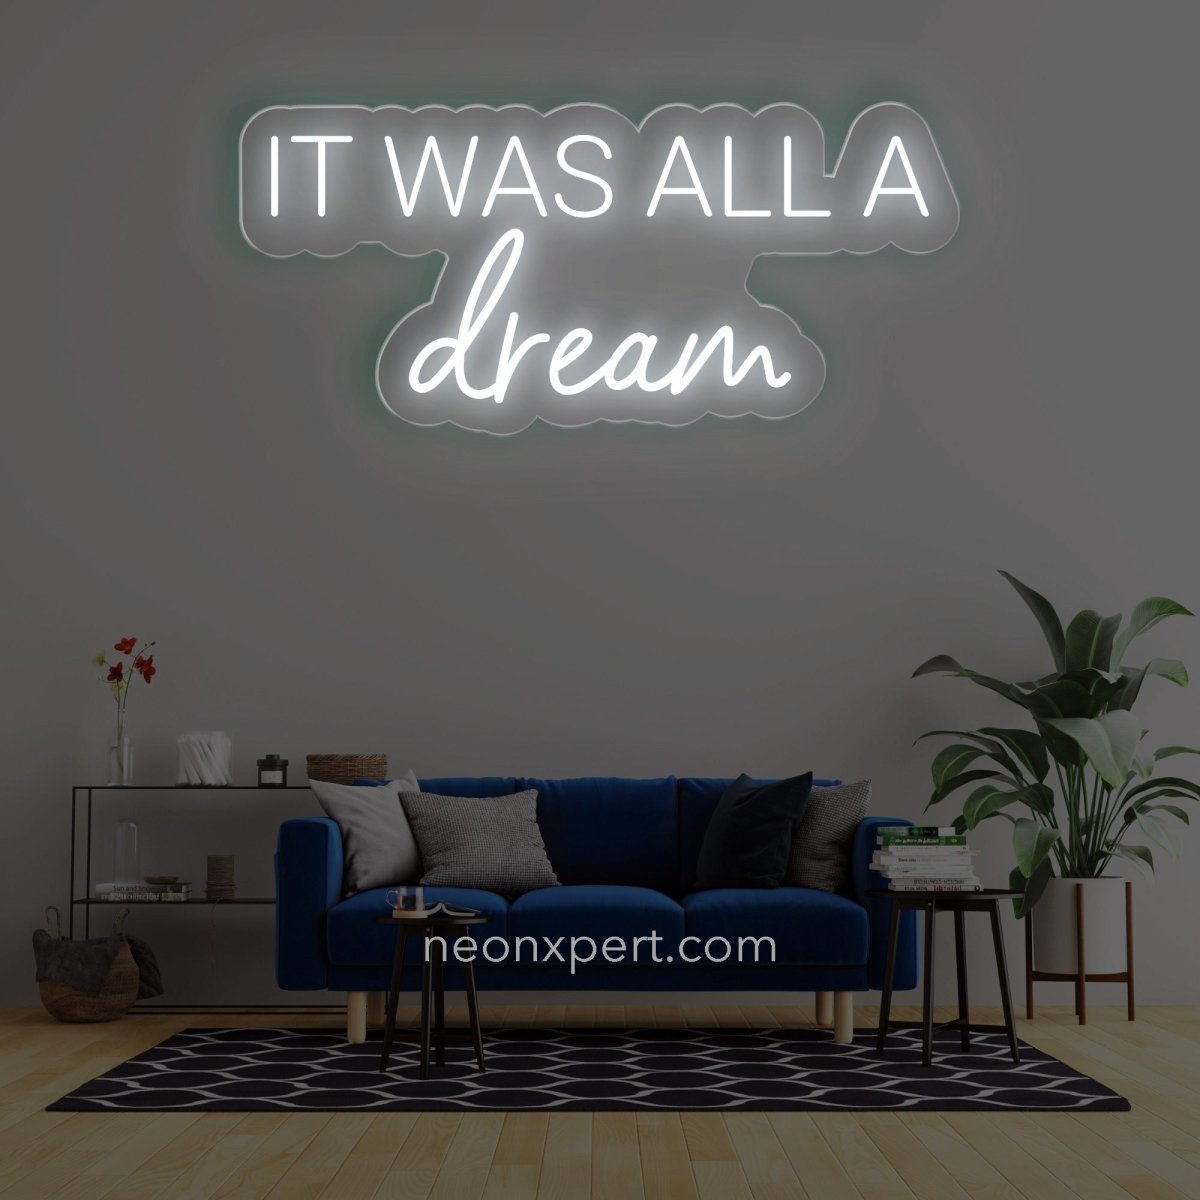 It was all a dream neon sign - NeonXpert